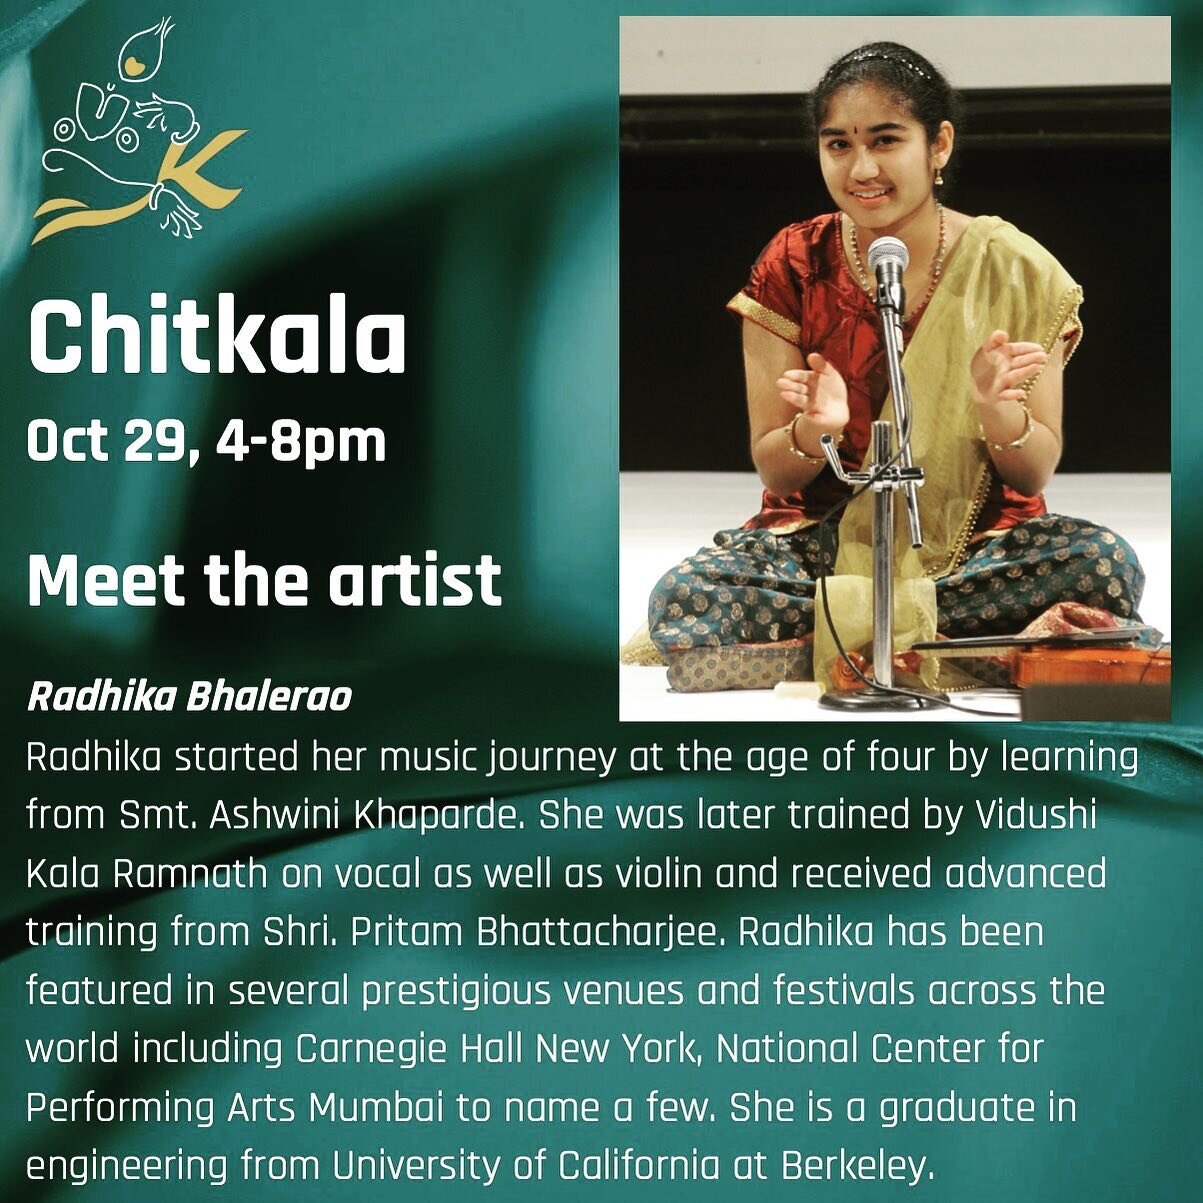 We are ready to be mesmerized by Radhika&rsquo;s music! Come join us for &lsquo;Chitkala&rsquo;&hellip; Sat Oct 29th. 4-5pm-meet and greet. Concert starts at 5pm :)